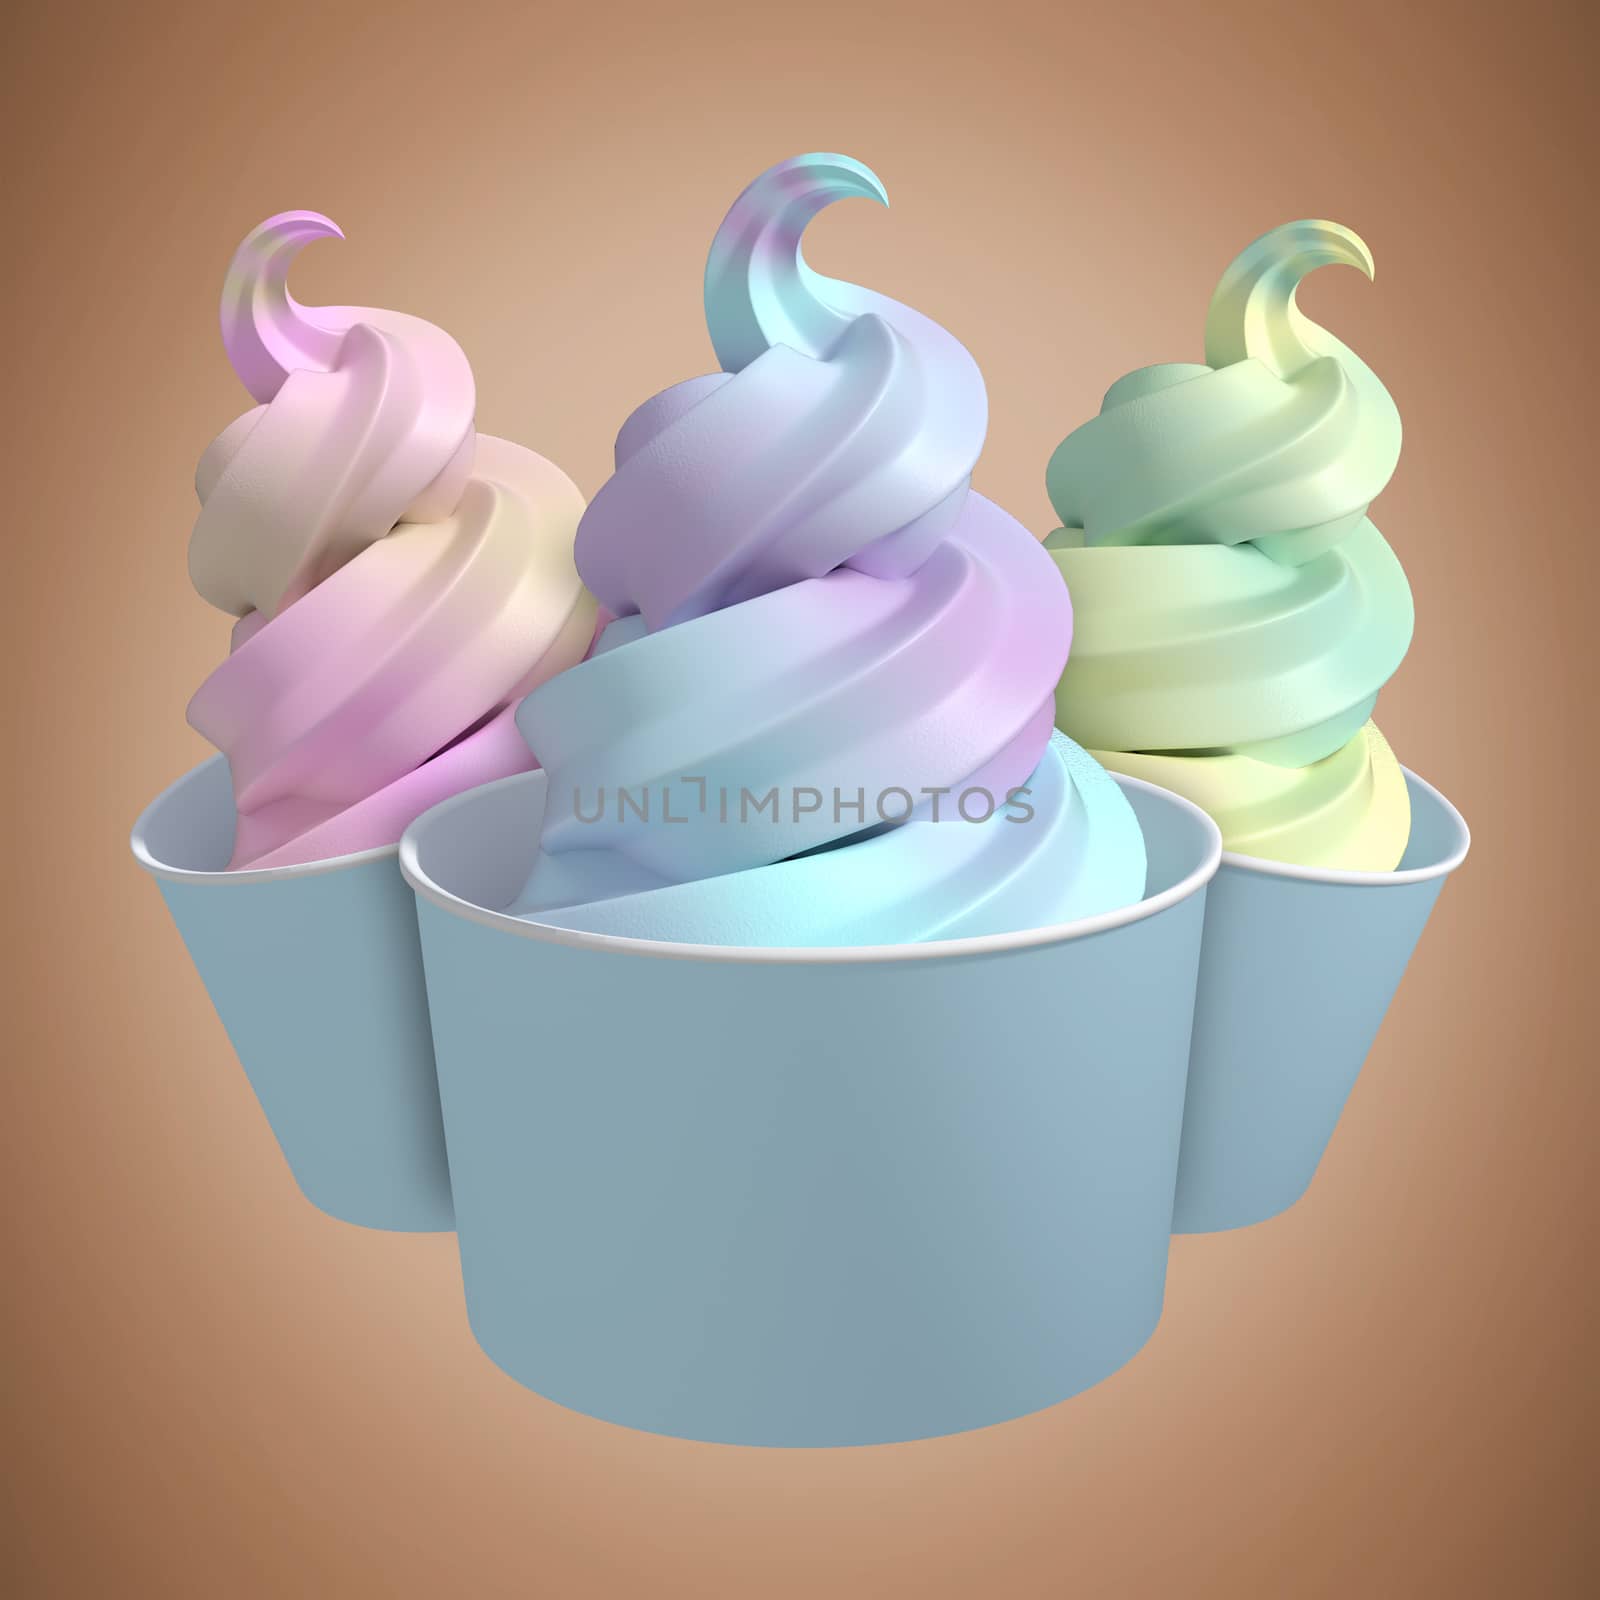 3D Composite image of  cupcakes against brown background